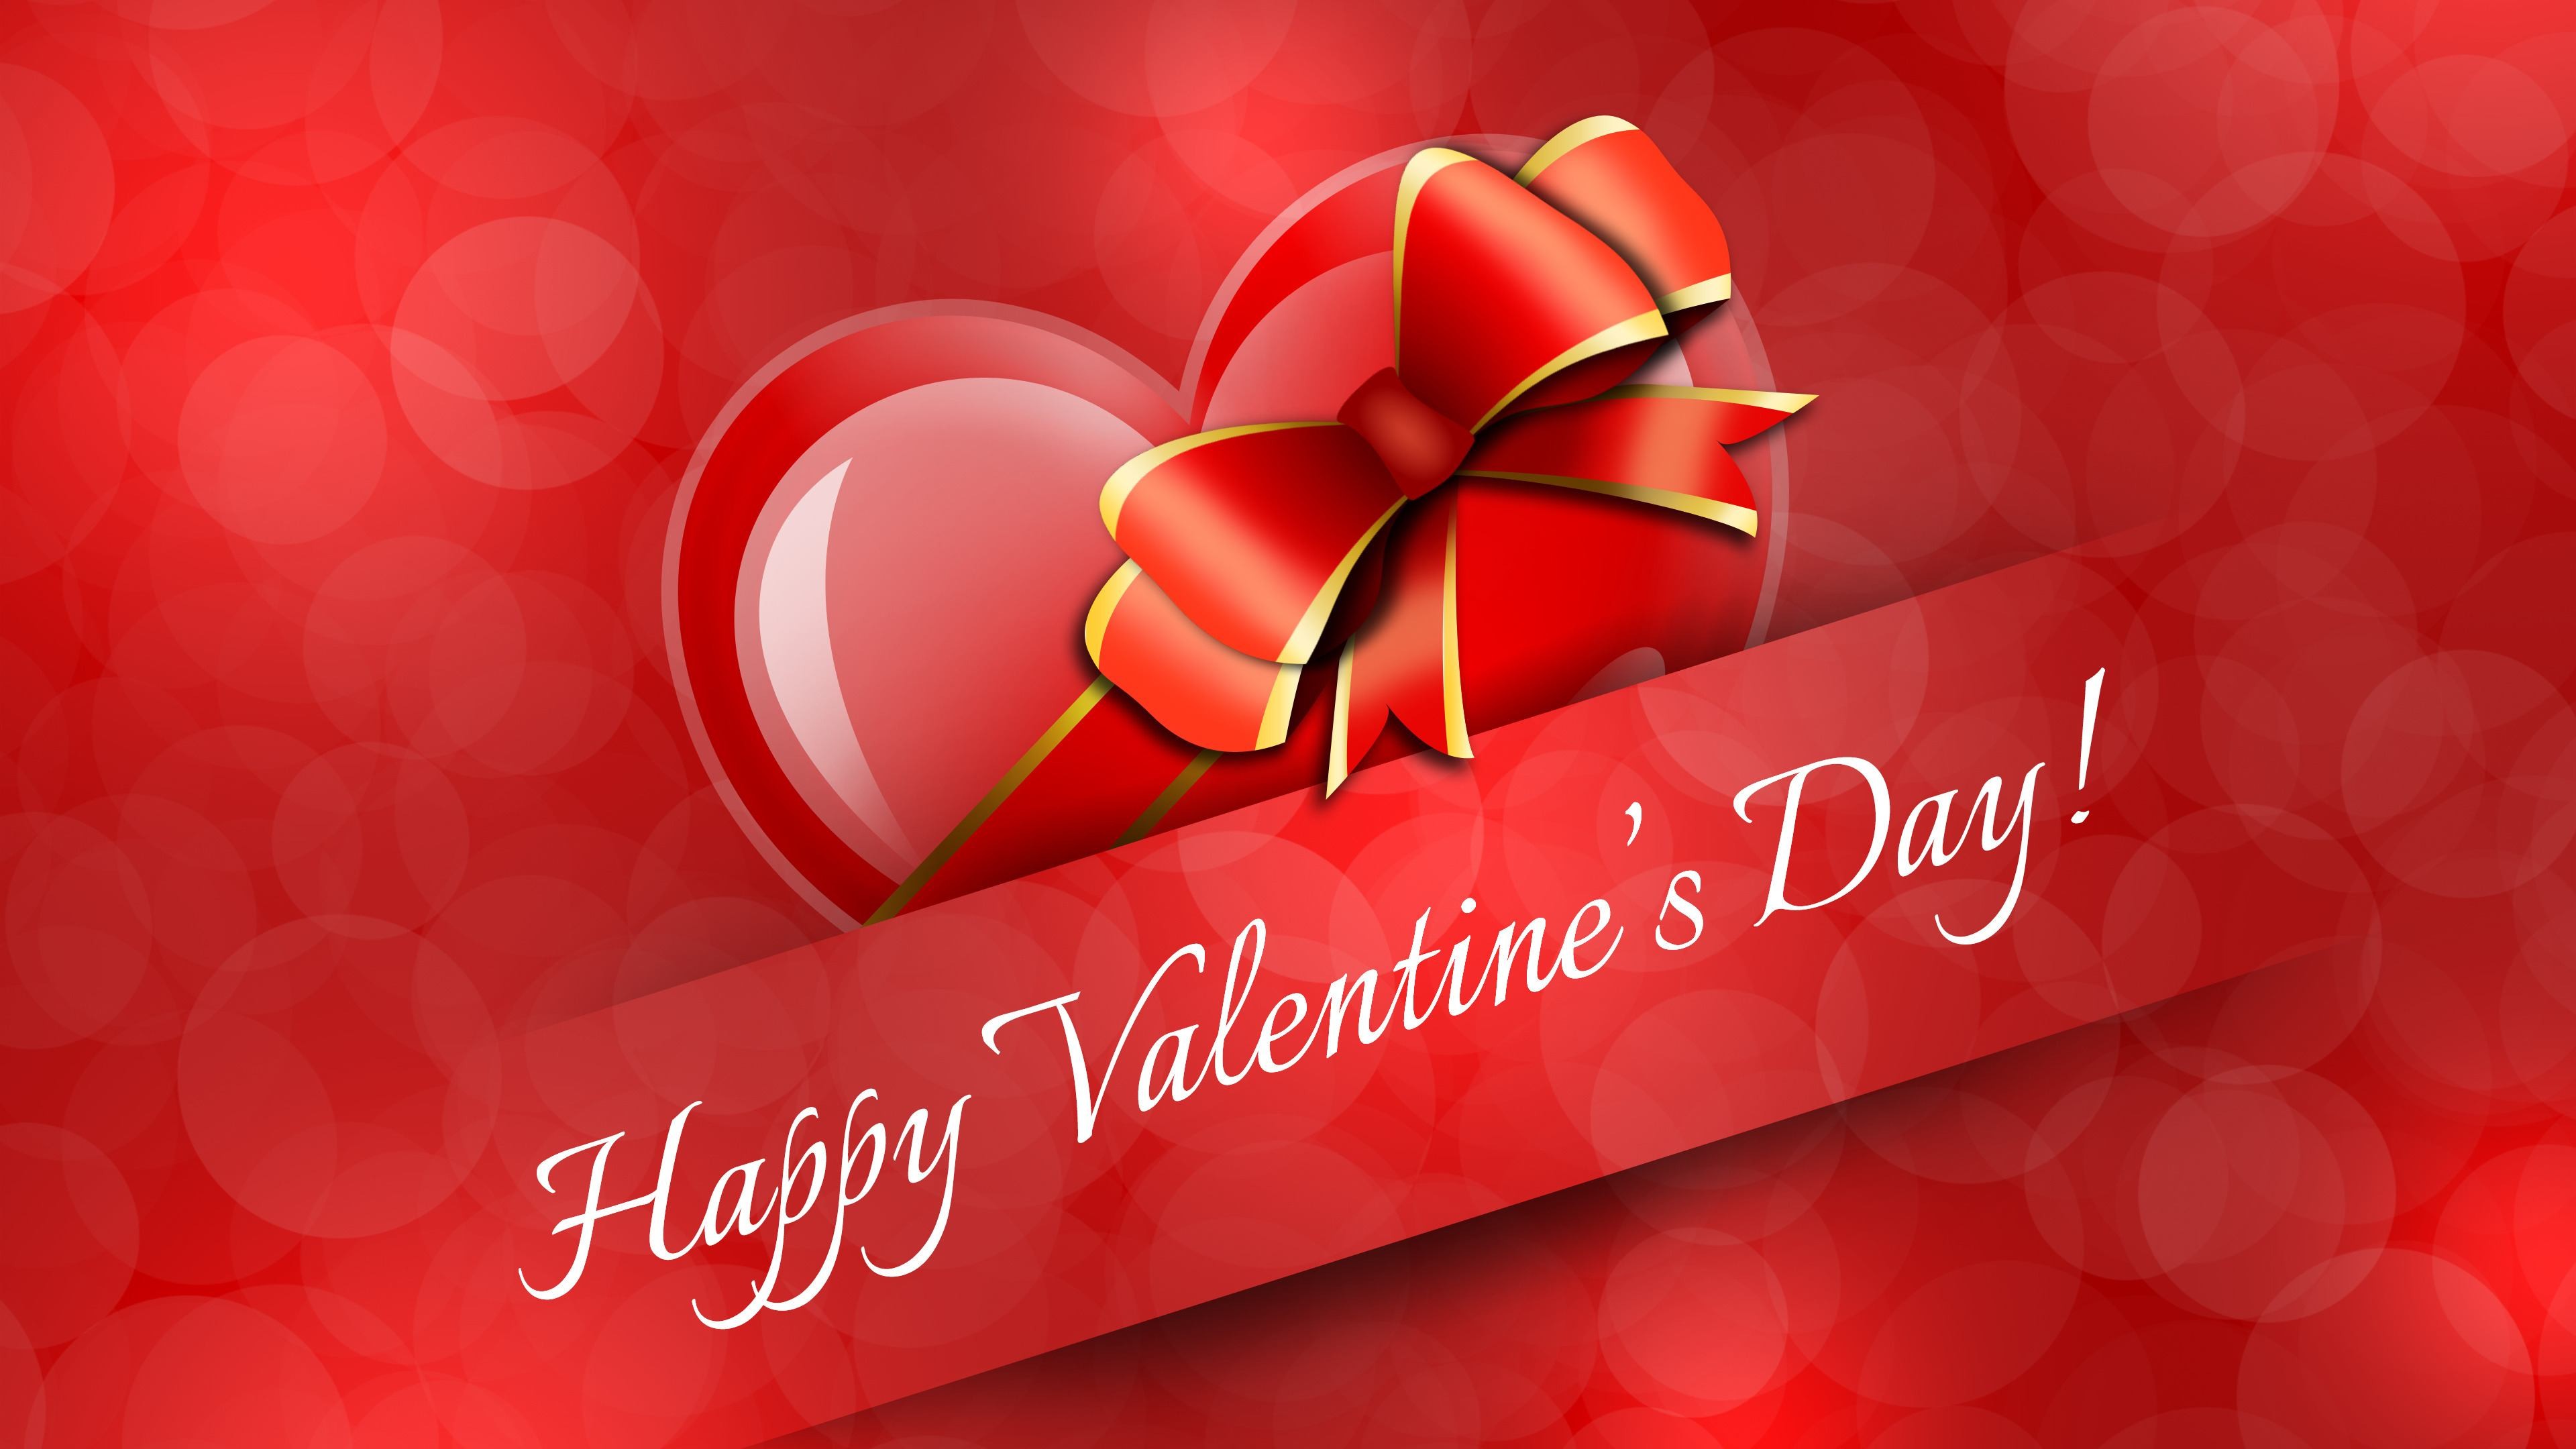 3840x2160 Happy Valentines Day 2015, Wallpapers, e-Greetings, Download